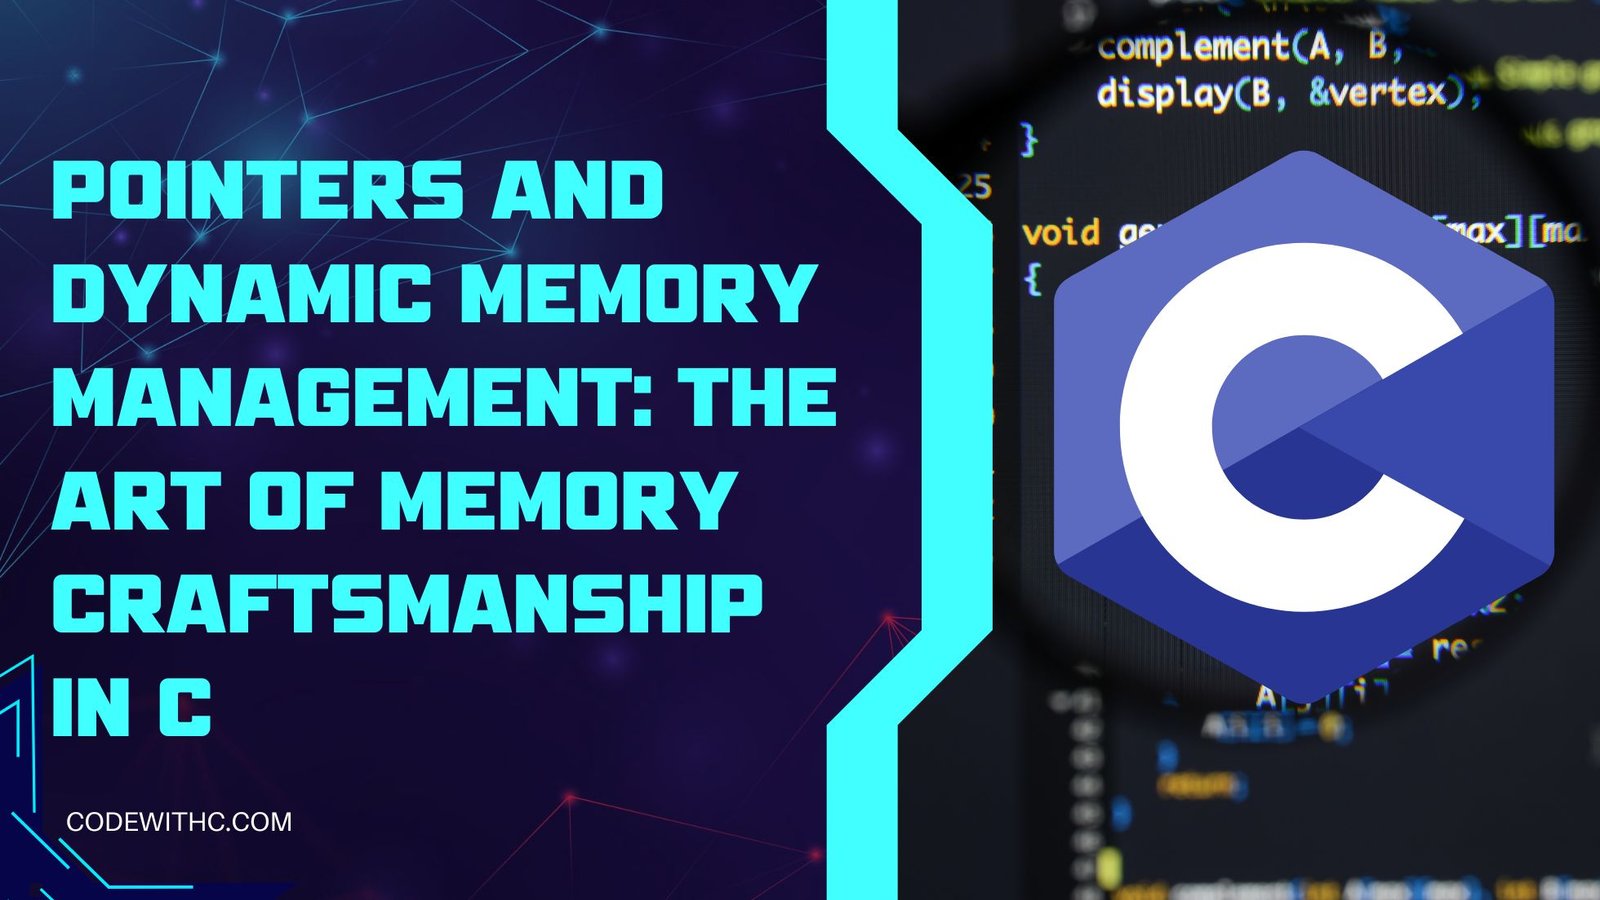 Pointers and Dynamic Memory Management The Art of Memory Craftsmanship in C